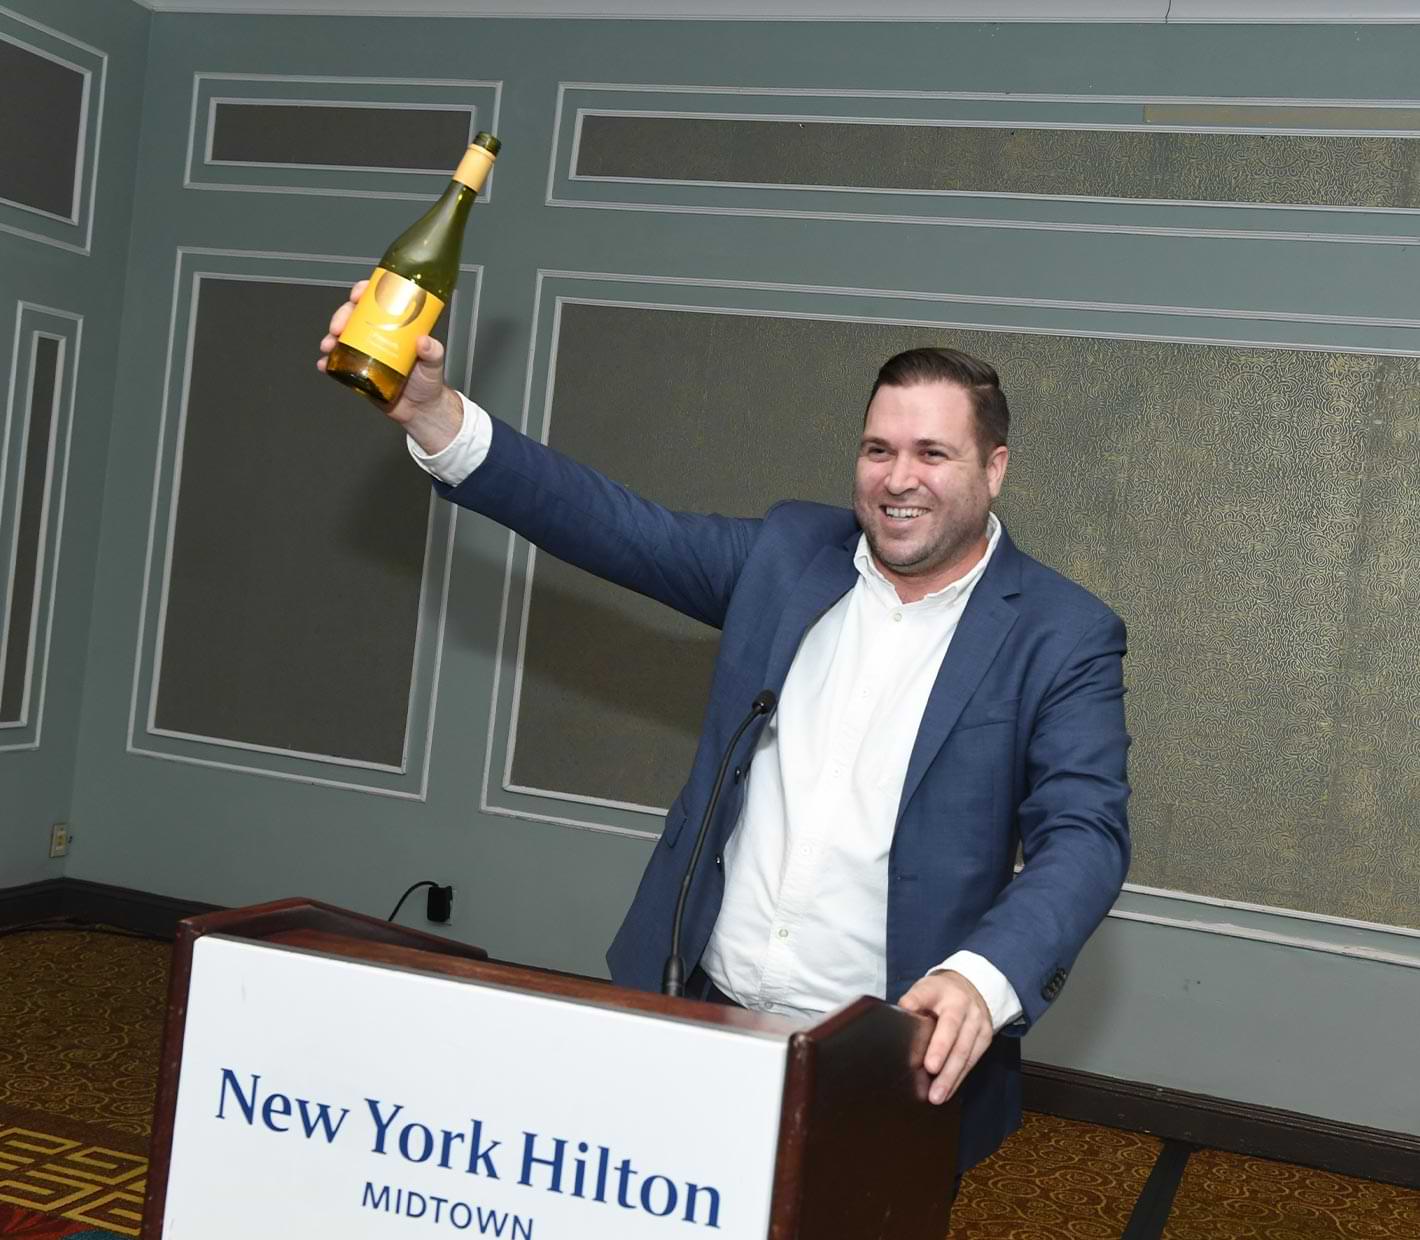 a alumni stands a podium holding a bottle of wine